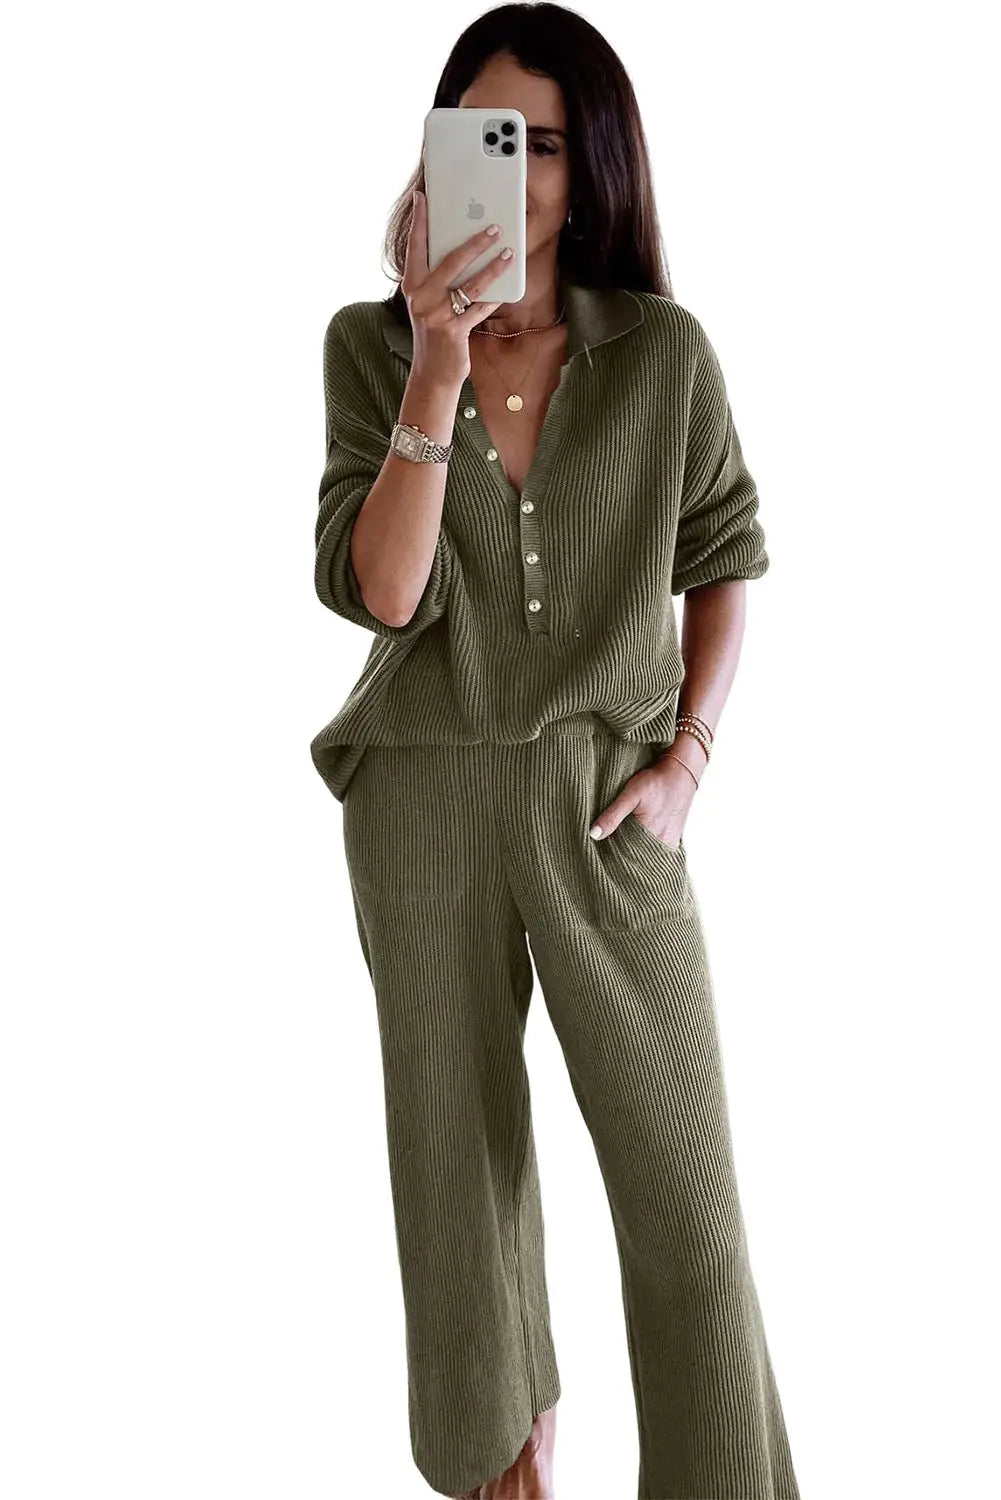 Green ribbed knit collared henley top and pants lounge outfit - loungewear